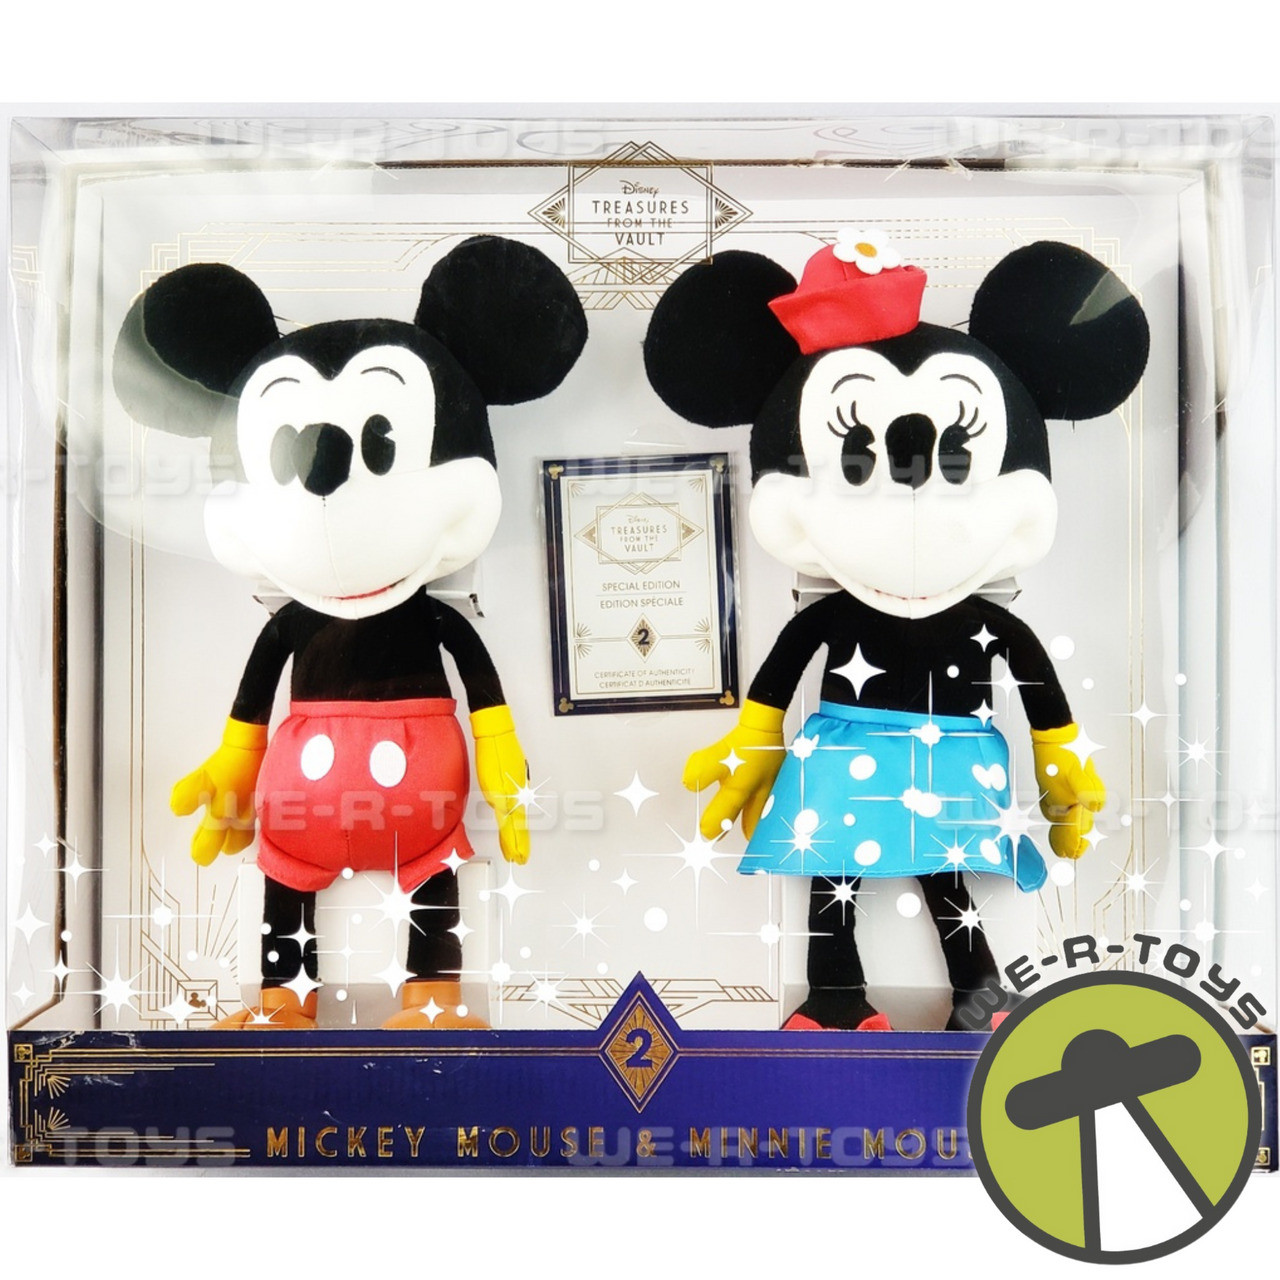 Disney Treasures from The Vault Mickey & Minnie Mouse Plush Set Classic  2020 NEW - We-R-Toys